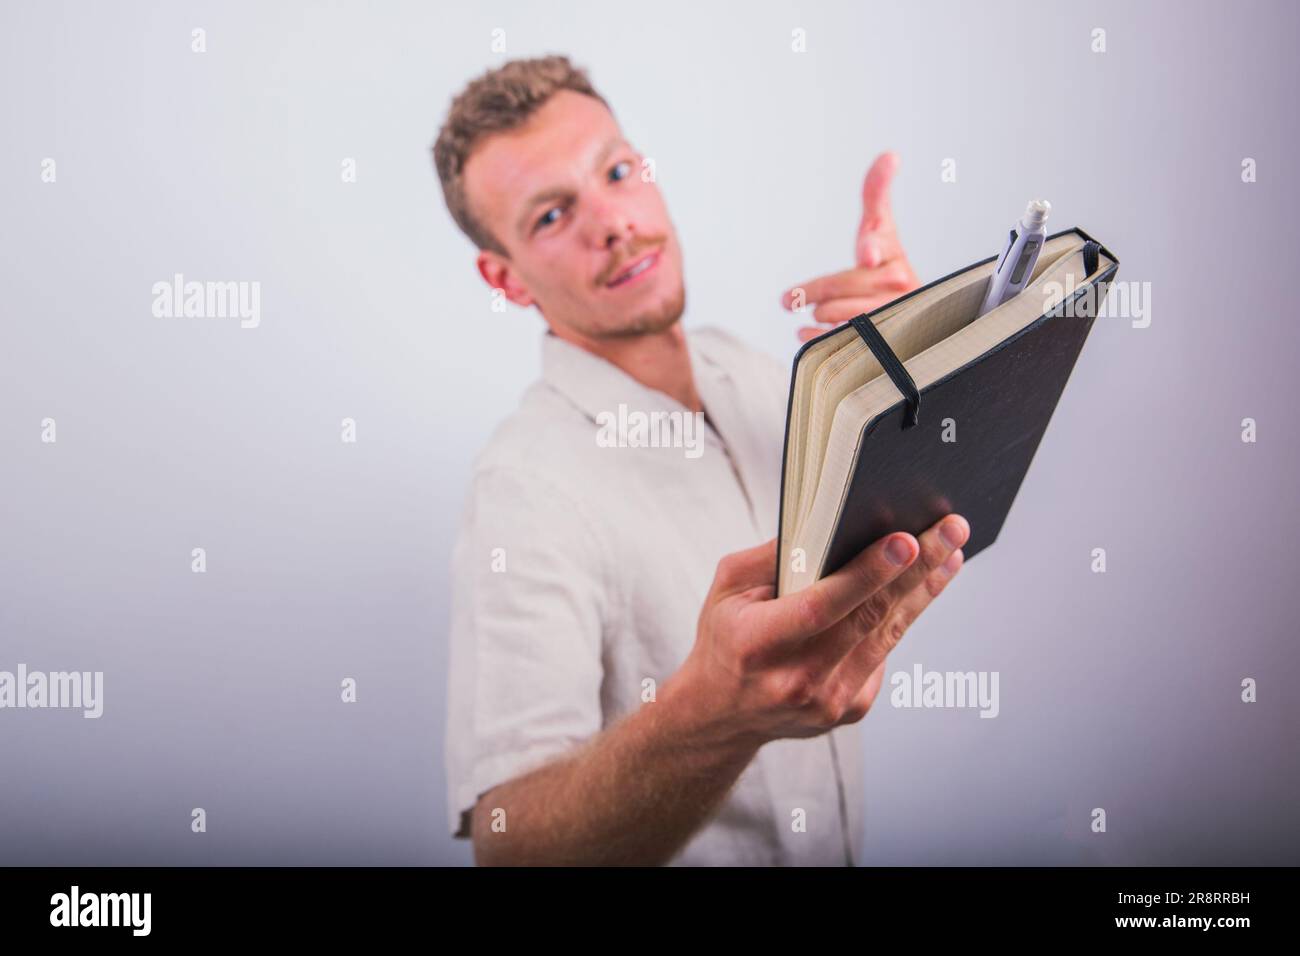 A writer holds an agenda and a pen in his hand and points to them, studio shot with white background Stock Photo